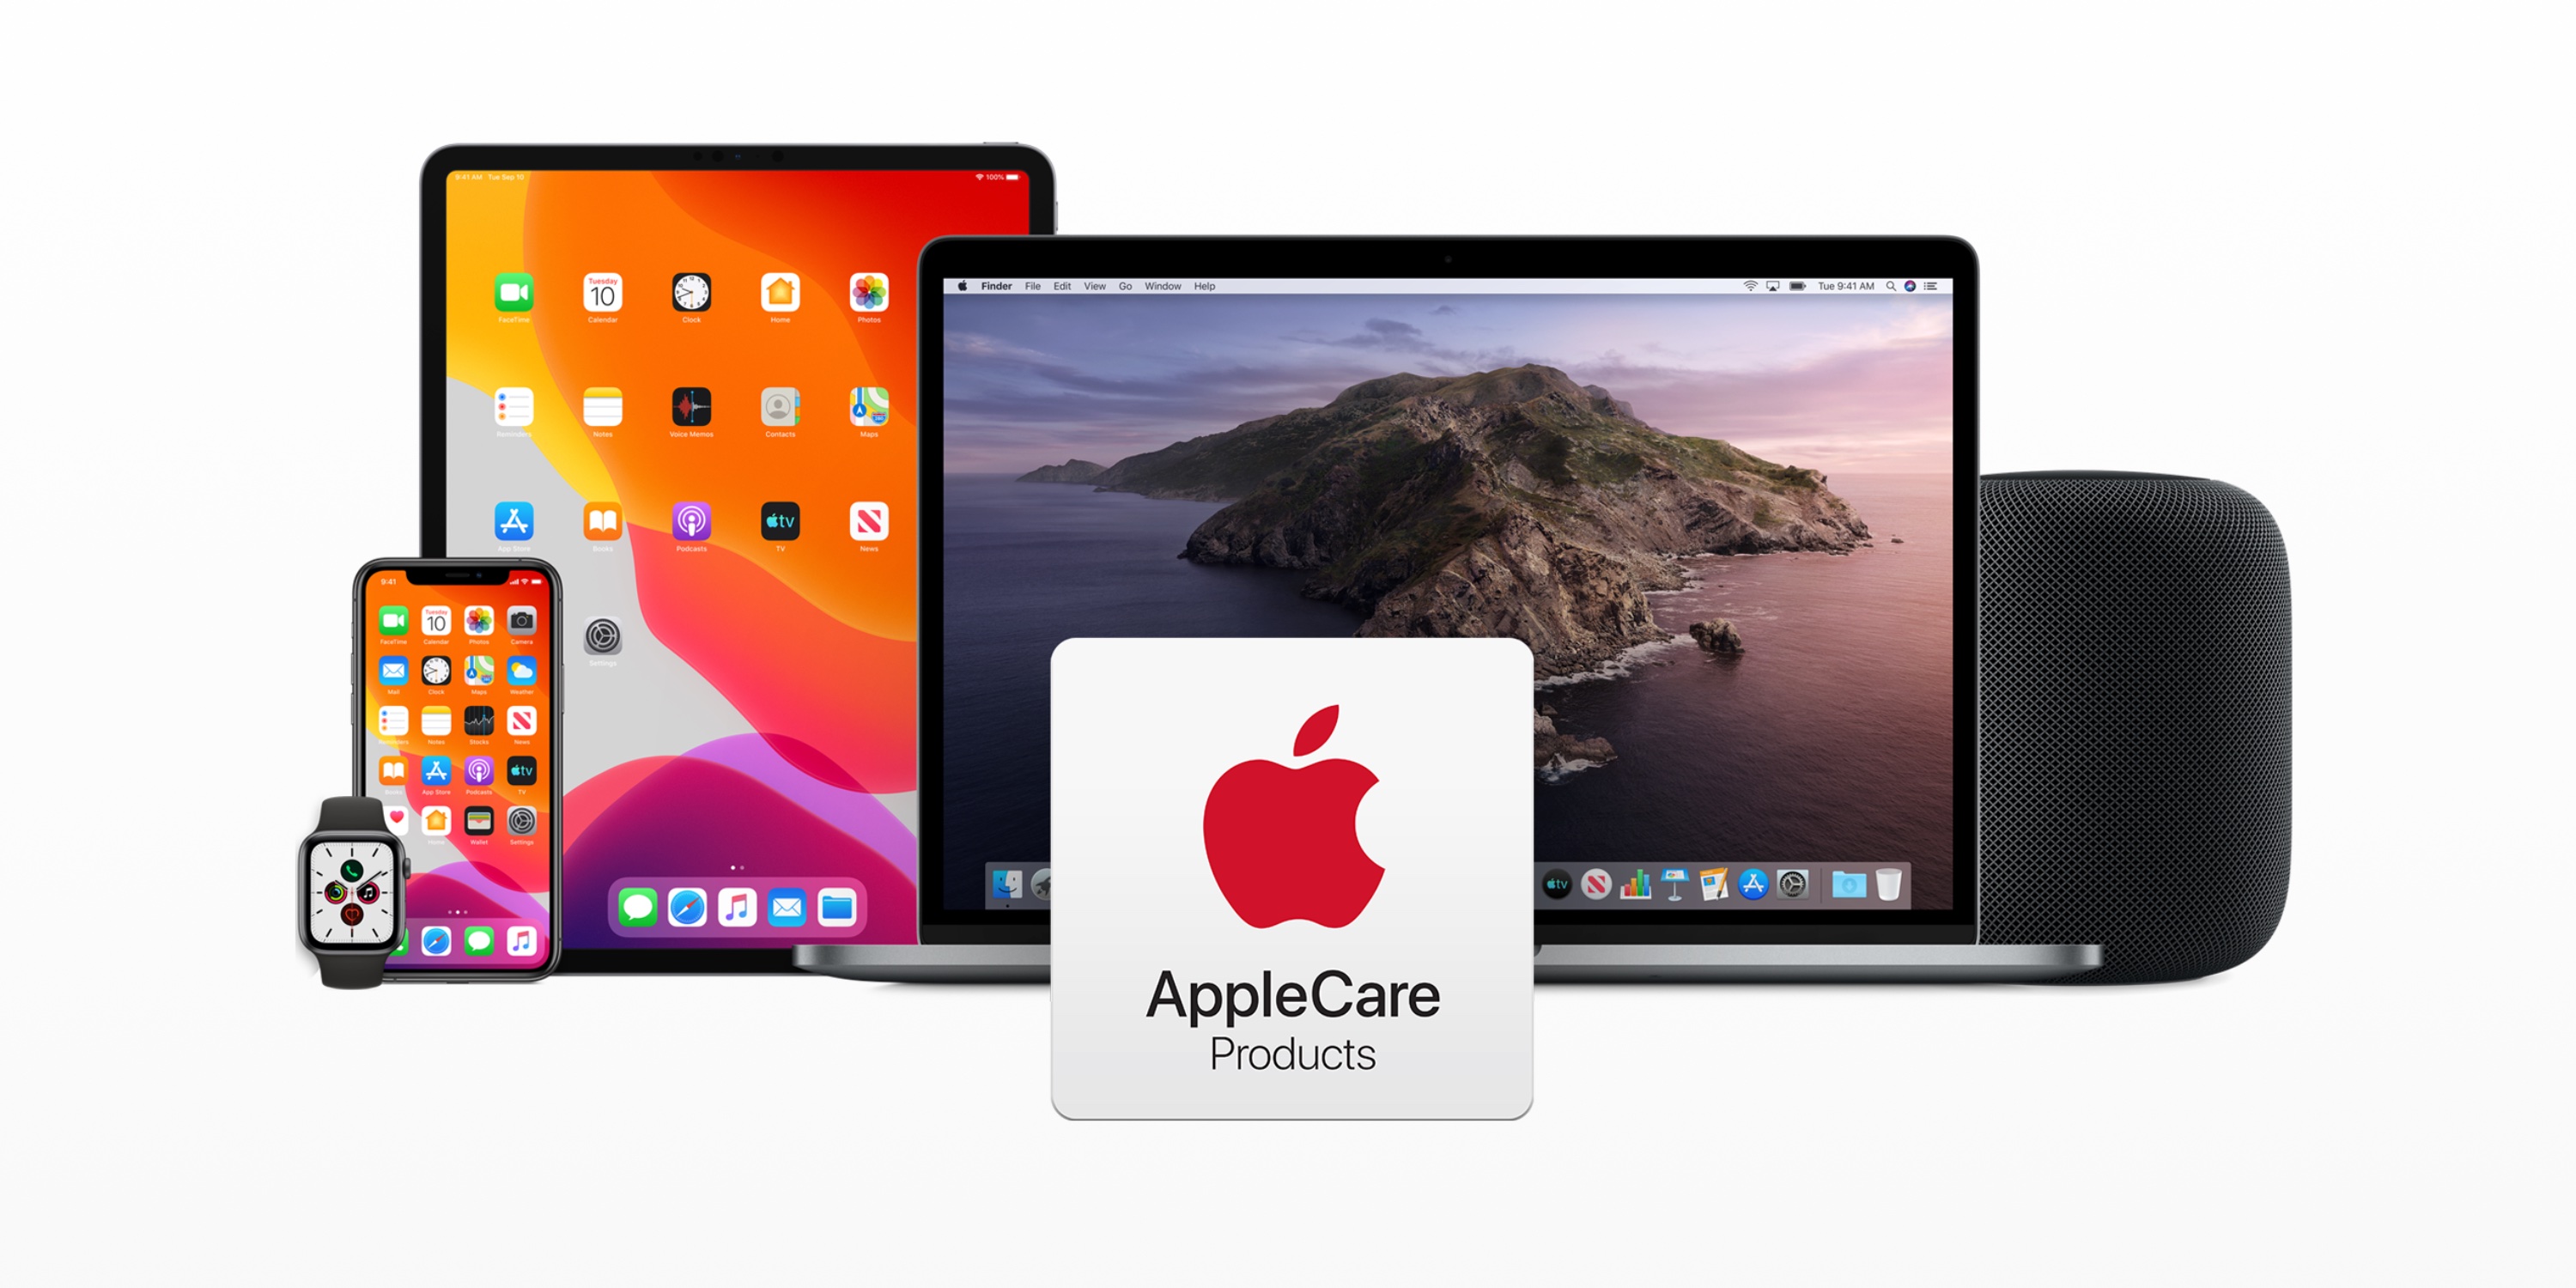 can you buy applecare after purchase apple watch